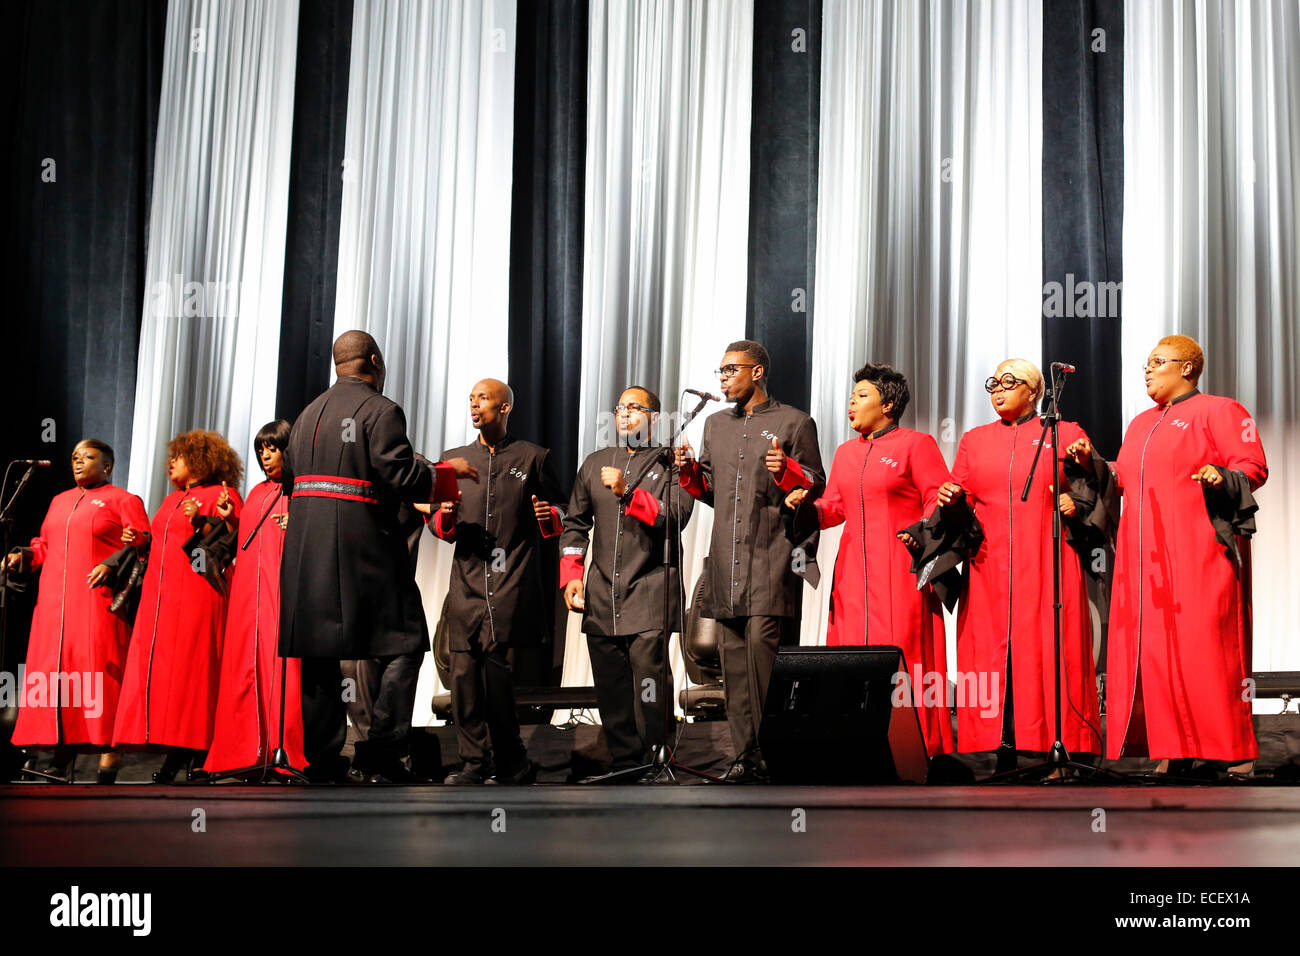 Detroit, Michigan - The Selected of God Choir performs at the opening session of the Intelligent Transport Systems World Congres Stock Photo